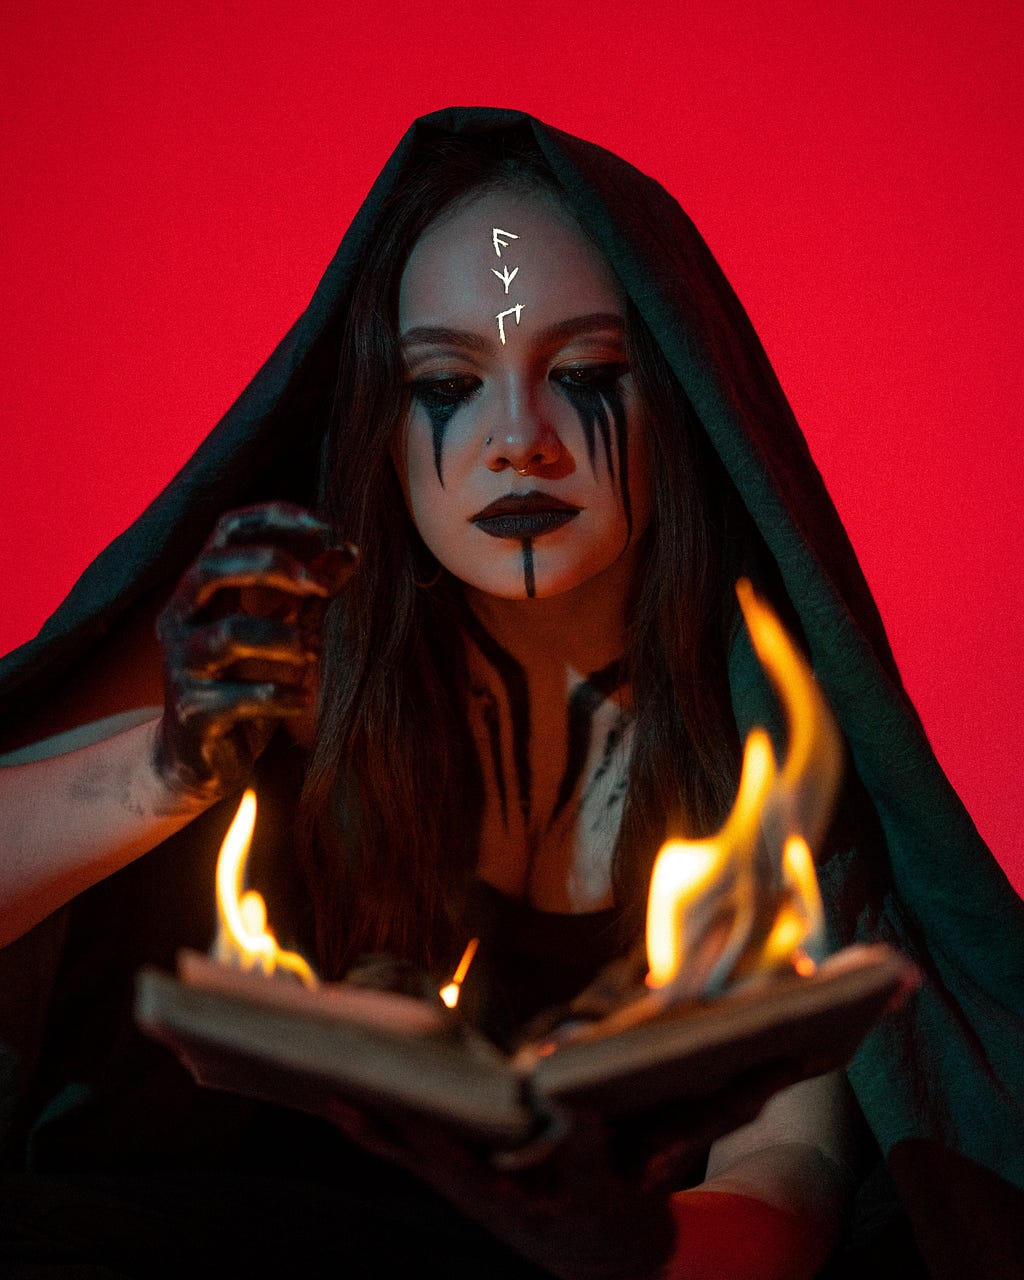 The photo depicts a woman before the fire, and black kohl kajal flowing from her eyes.